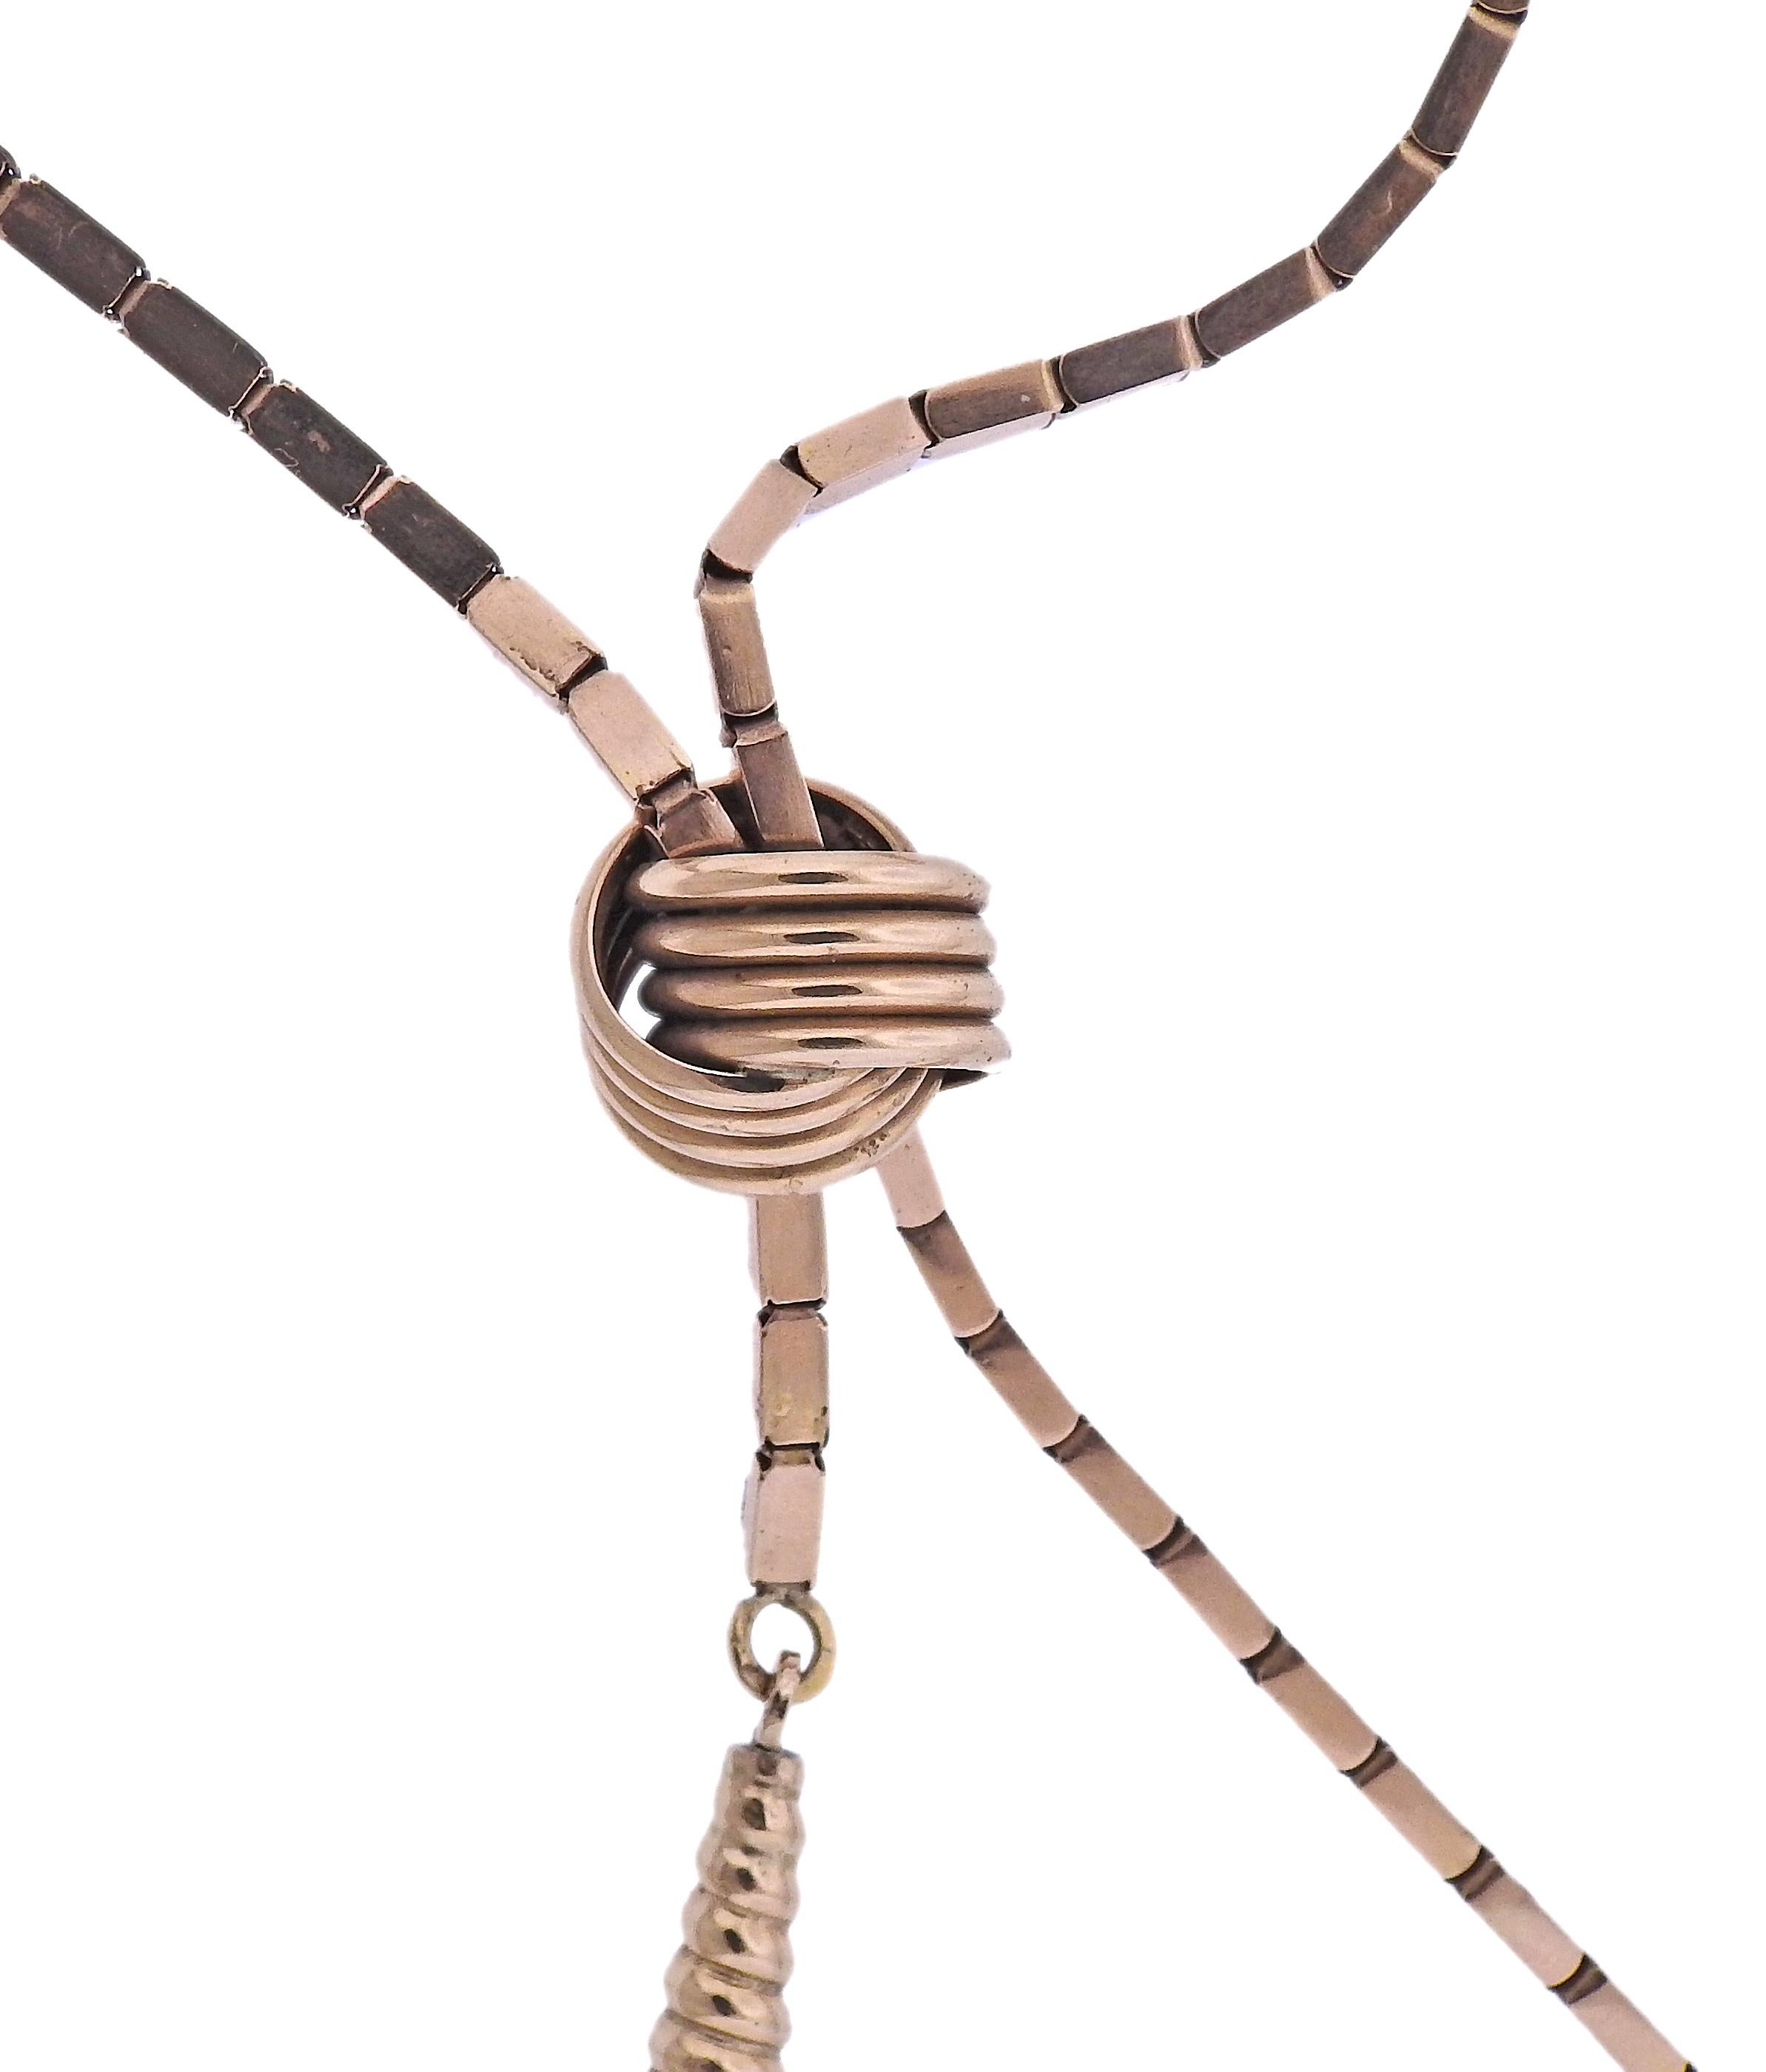 Retro 14k rose gold long necklace with tassel pendant, with sliding knot. Necklace is 27